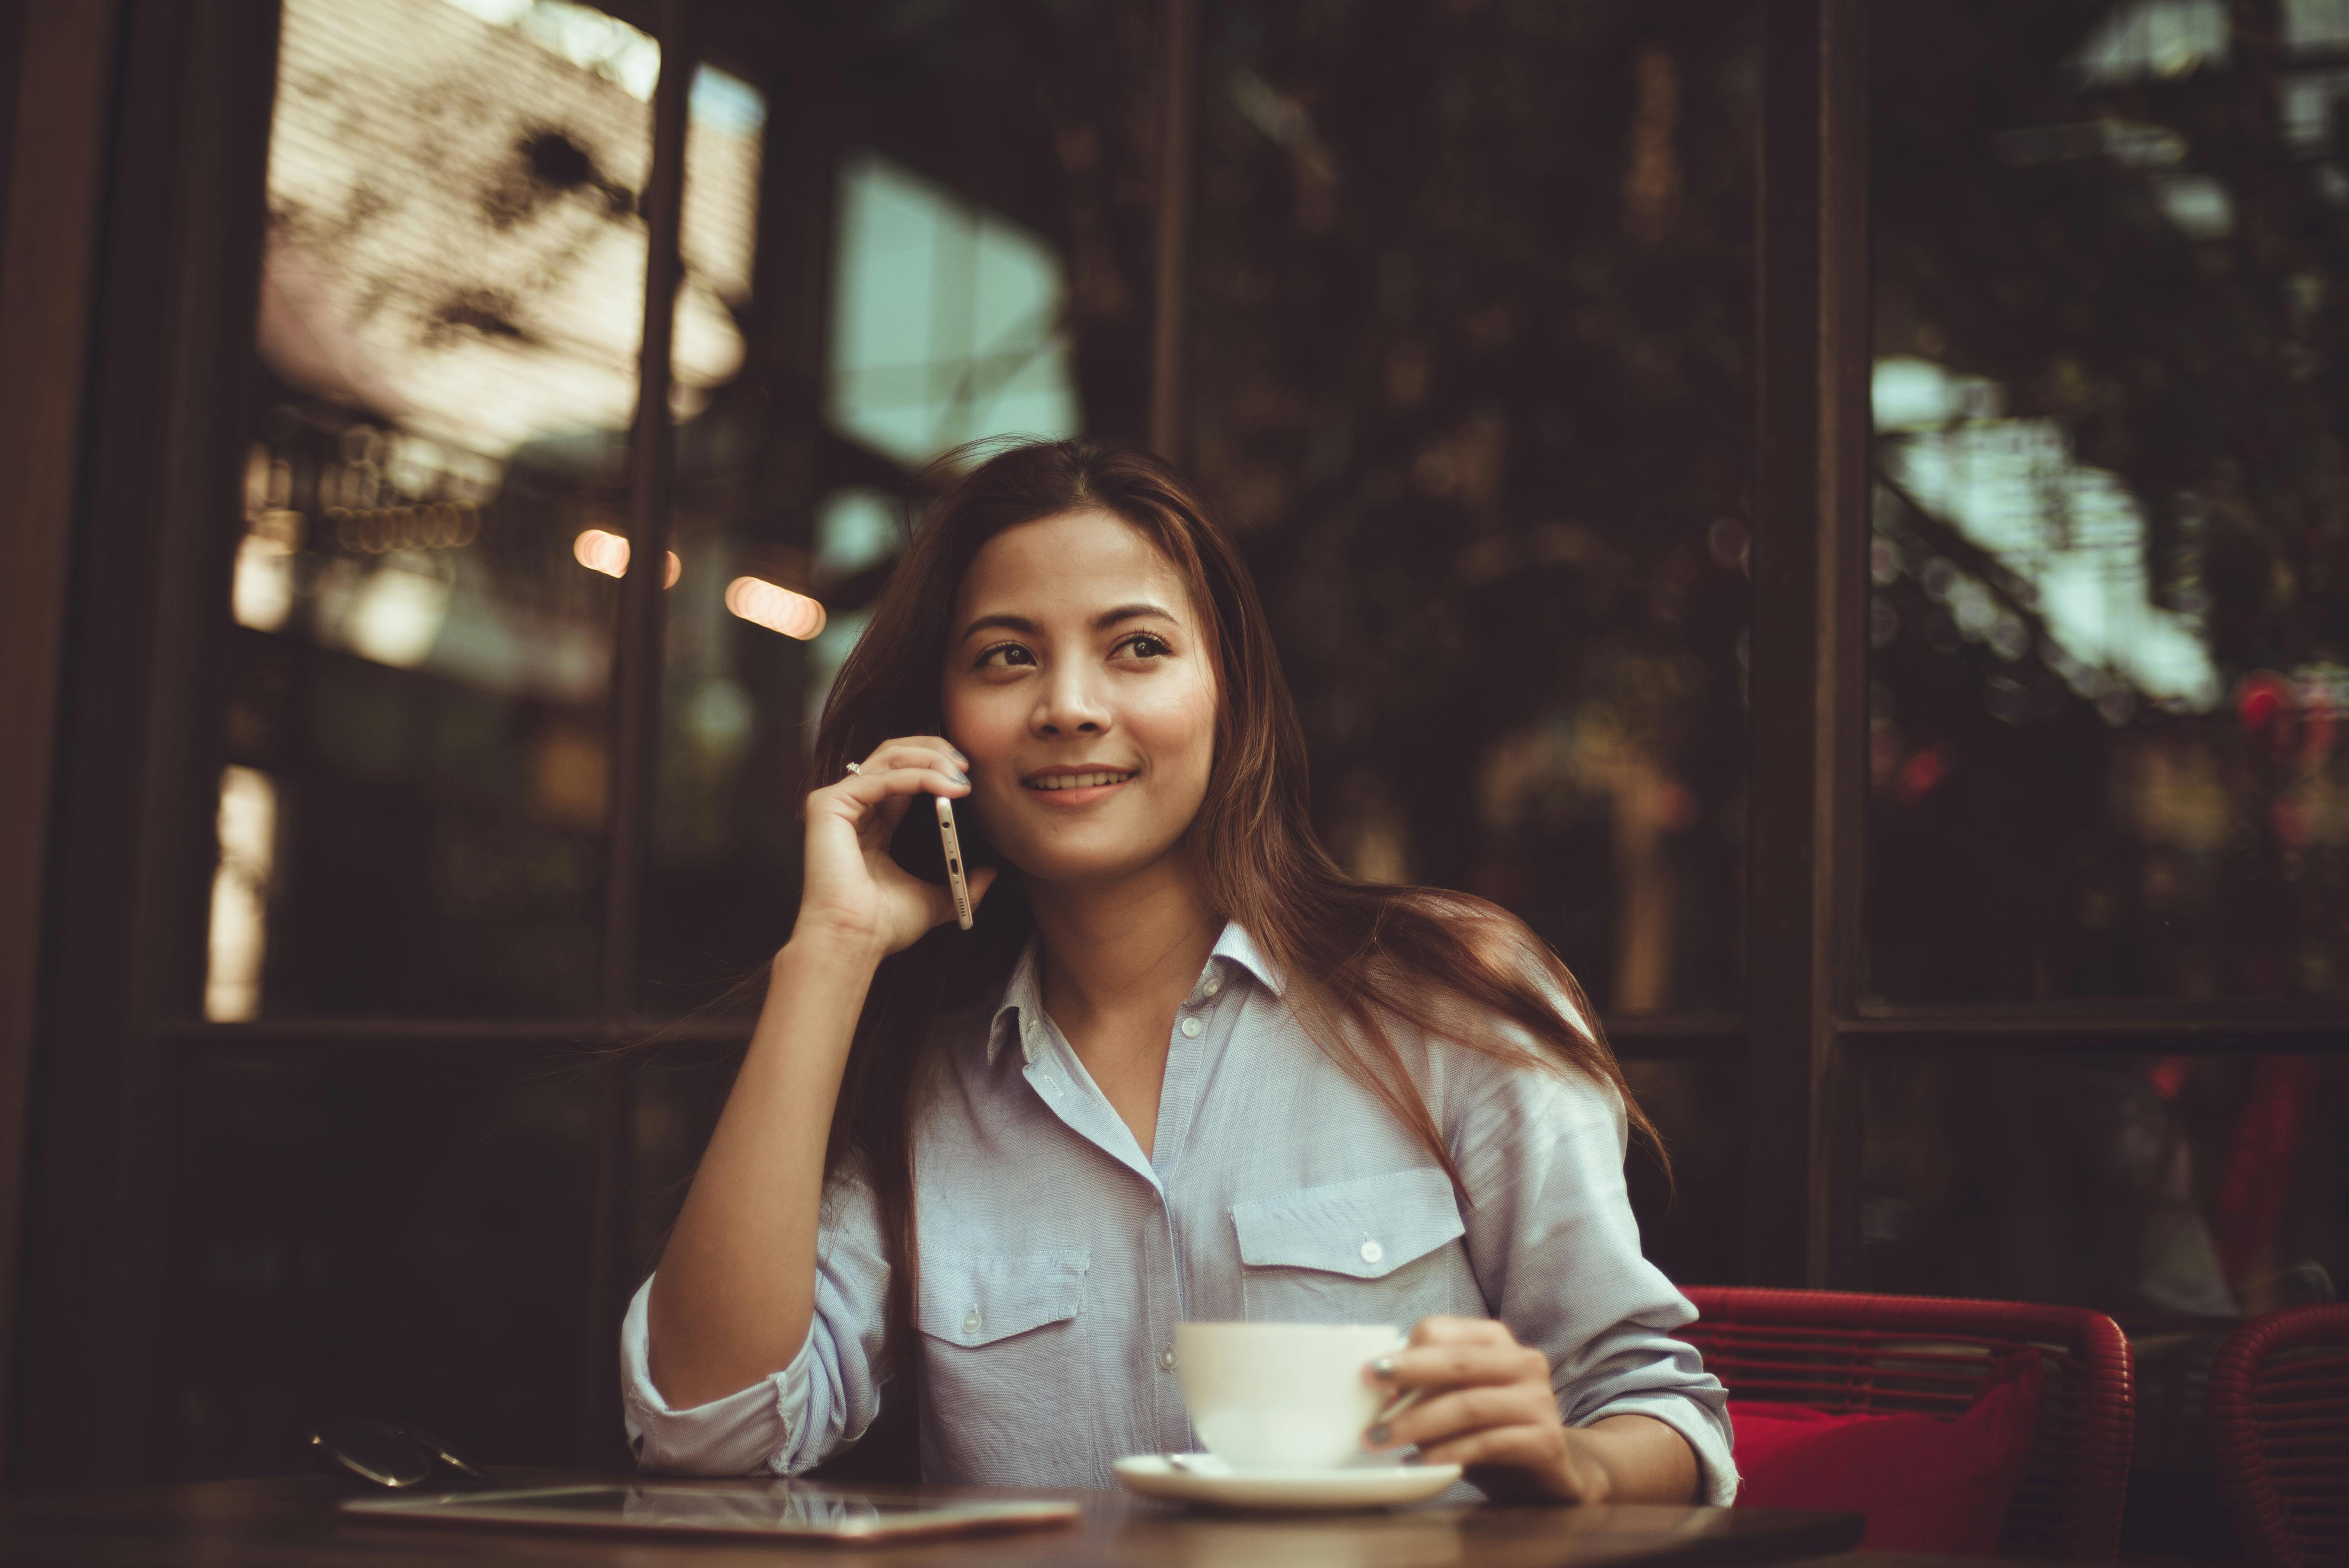 A woman smiling while talking on the phone and having a beverage | Source: Pexels